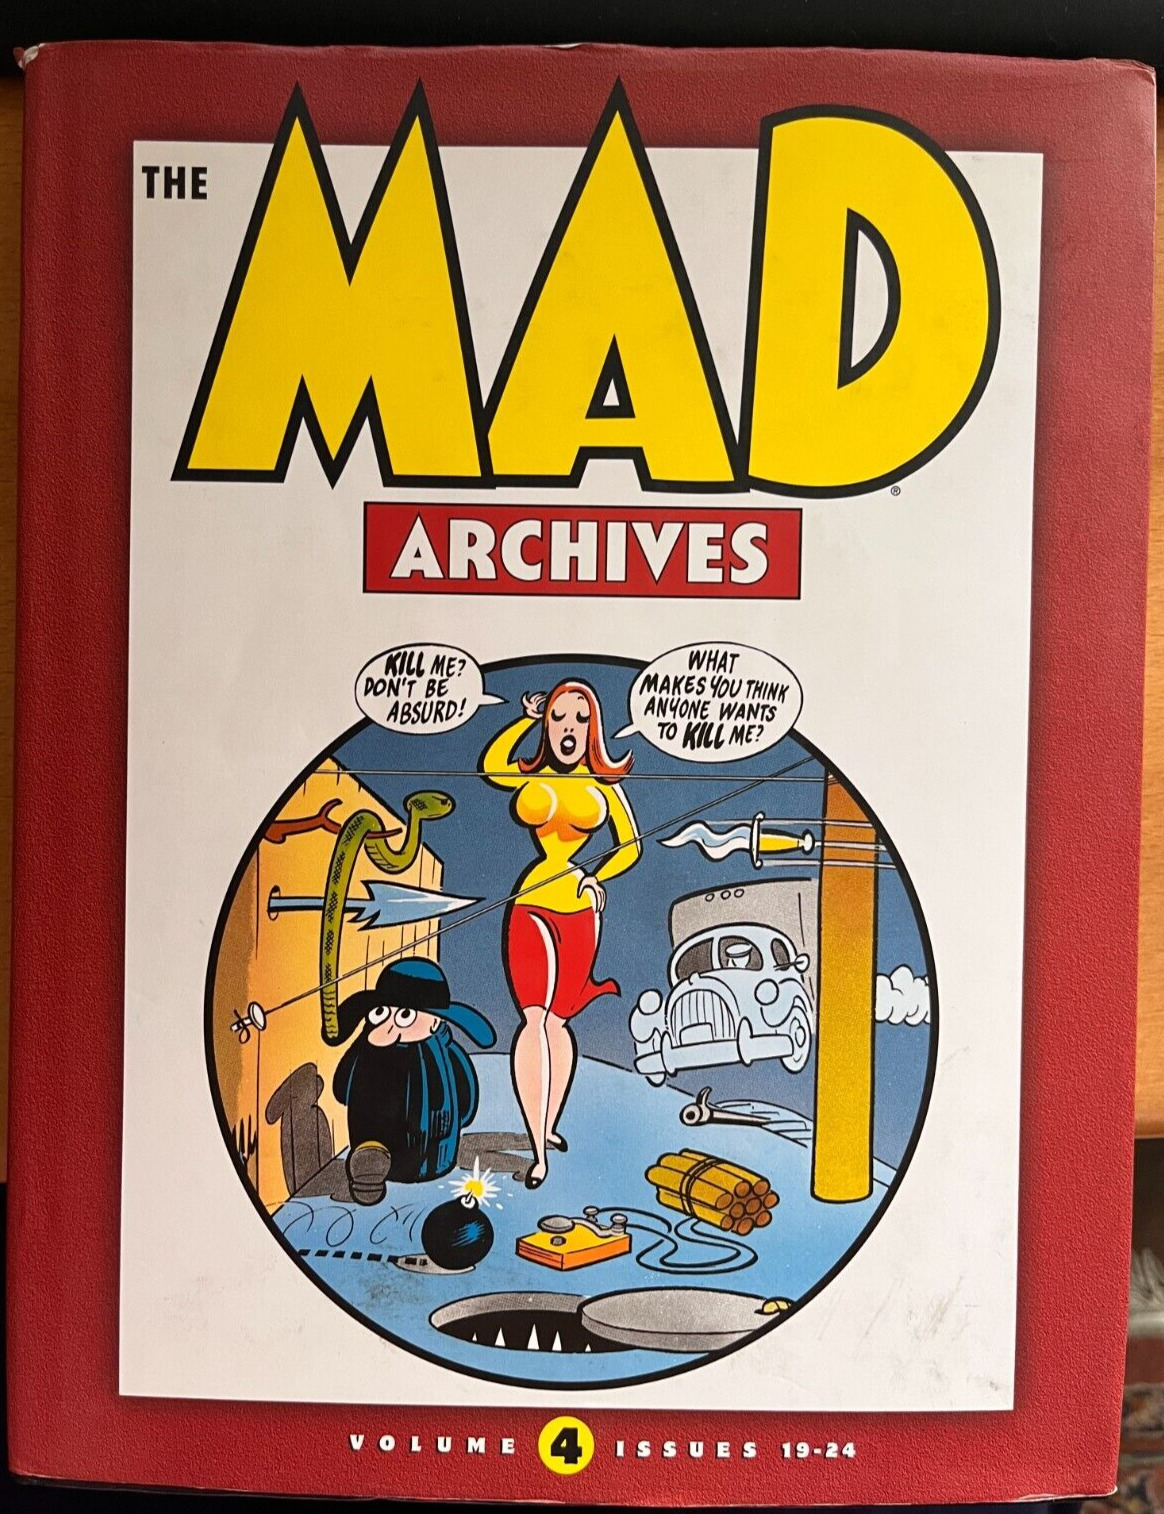 The MAD Archives Vol. 4 Archive Editions 2012 Hardcover COLLECTORS RAREST